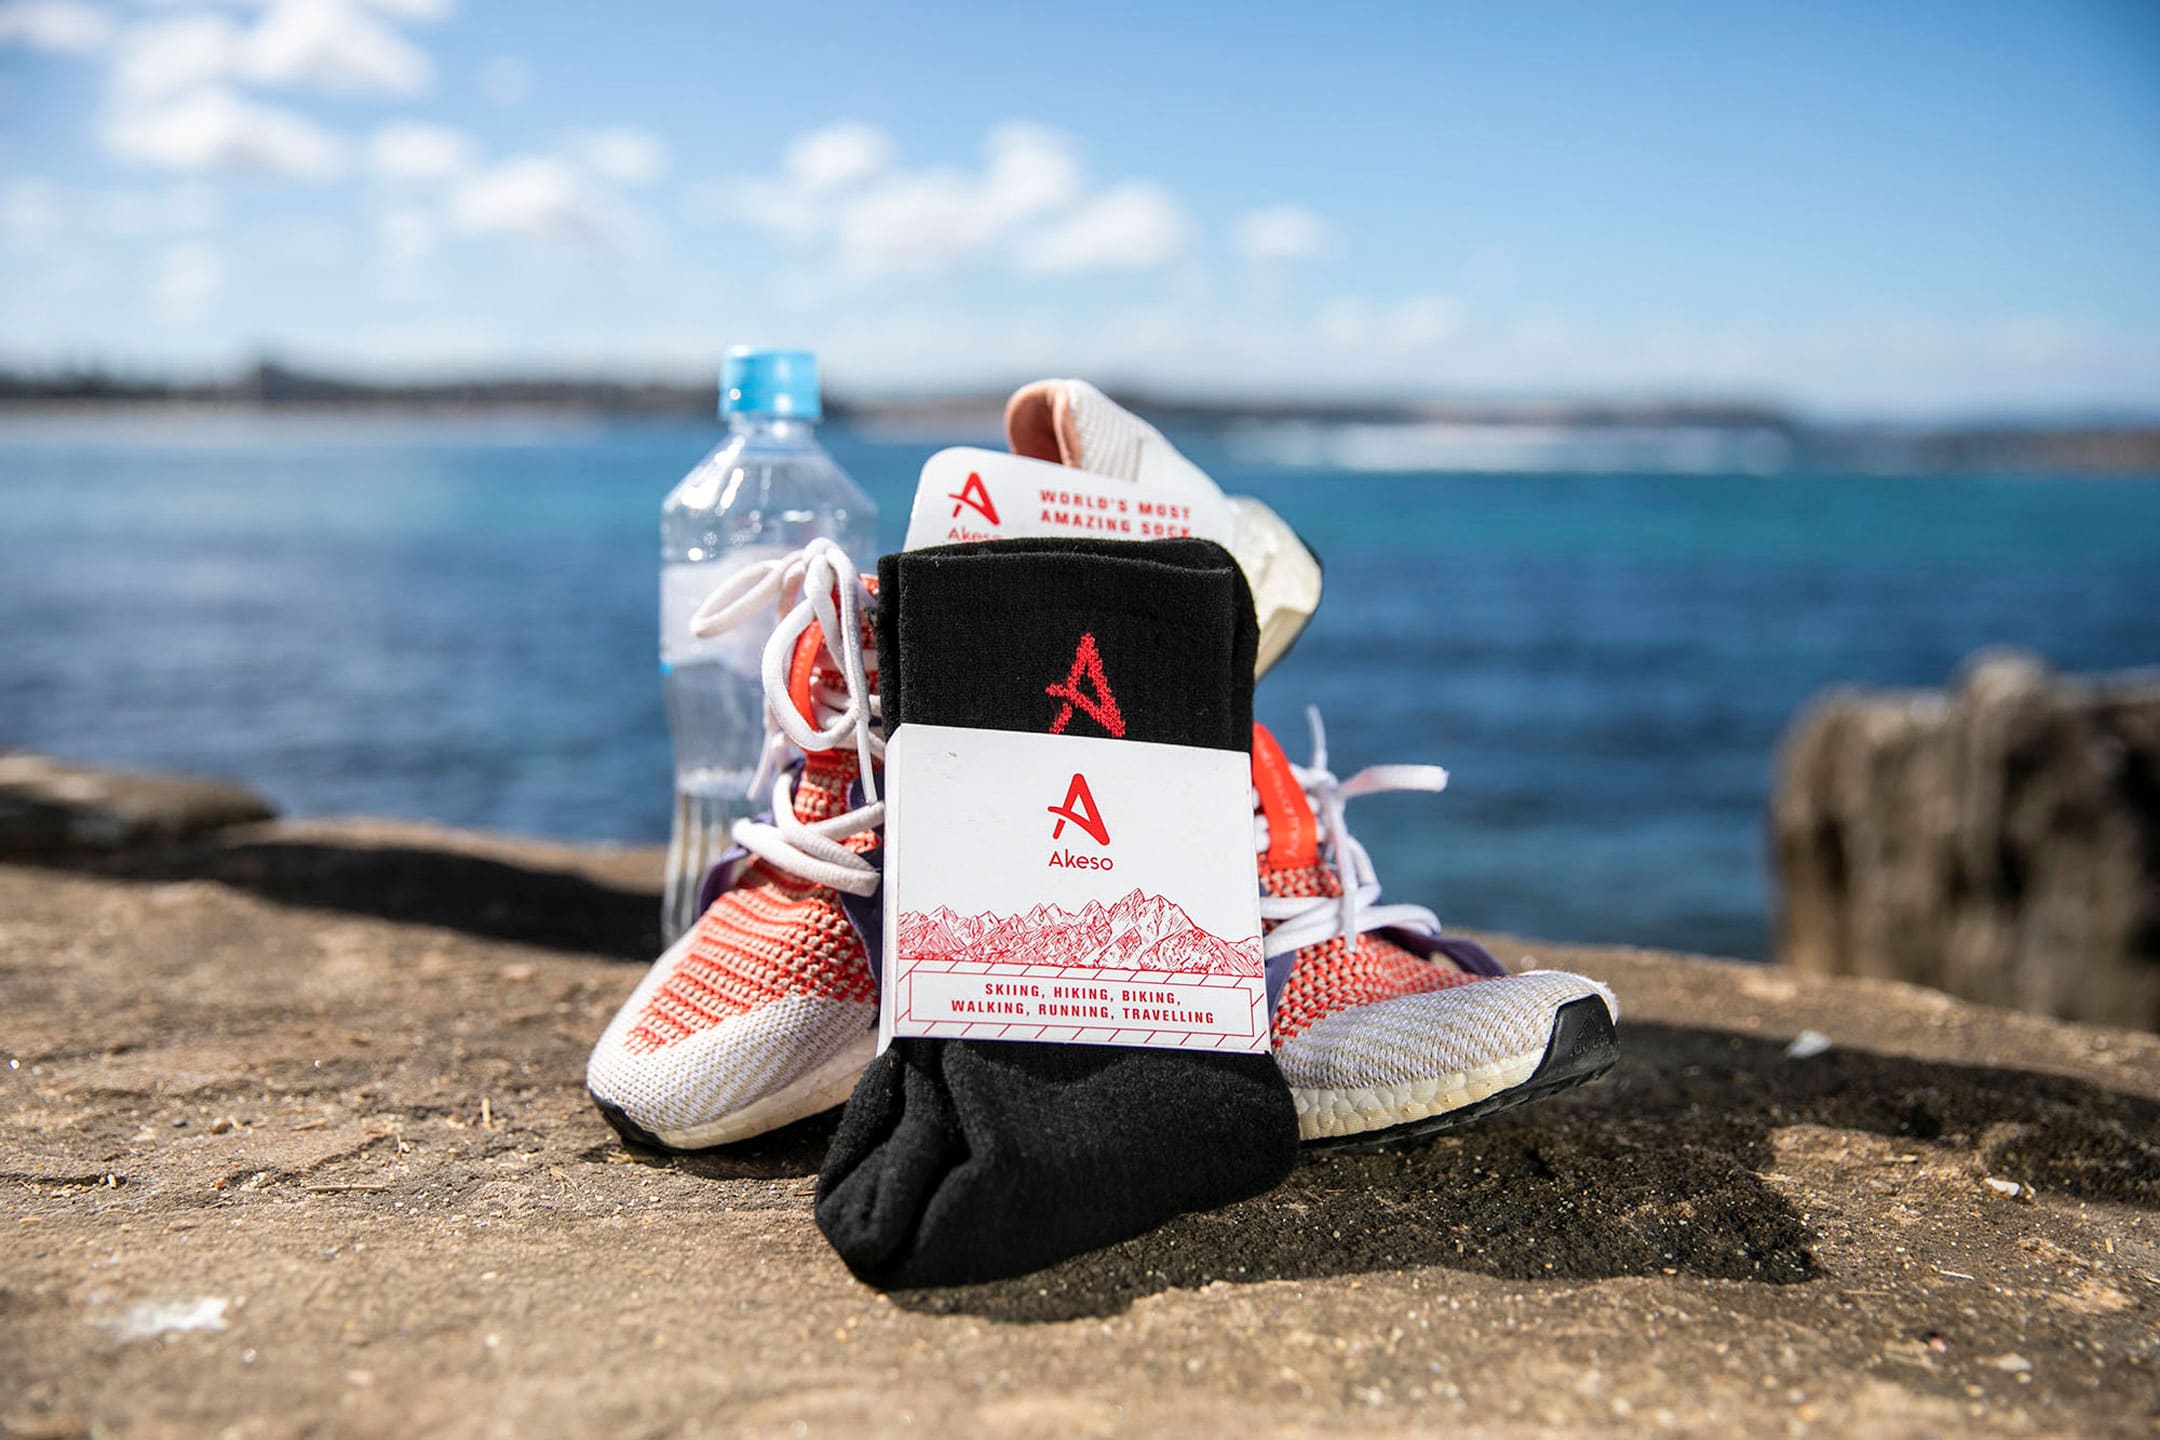 Akeso socks leaning against running shoes with water bottle